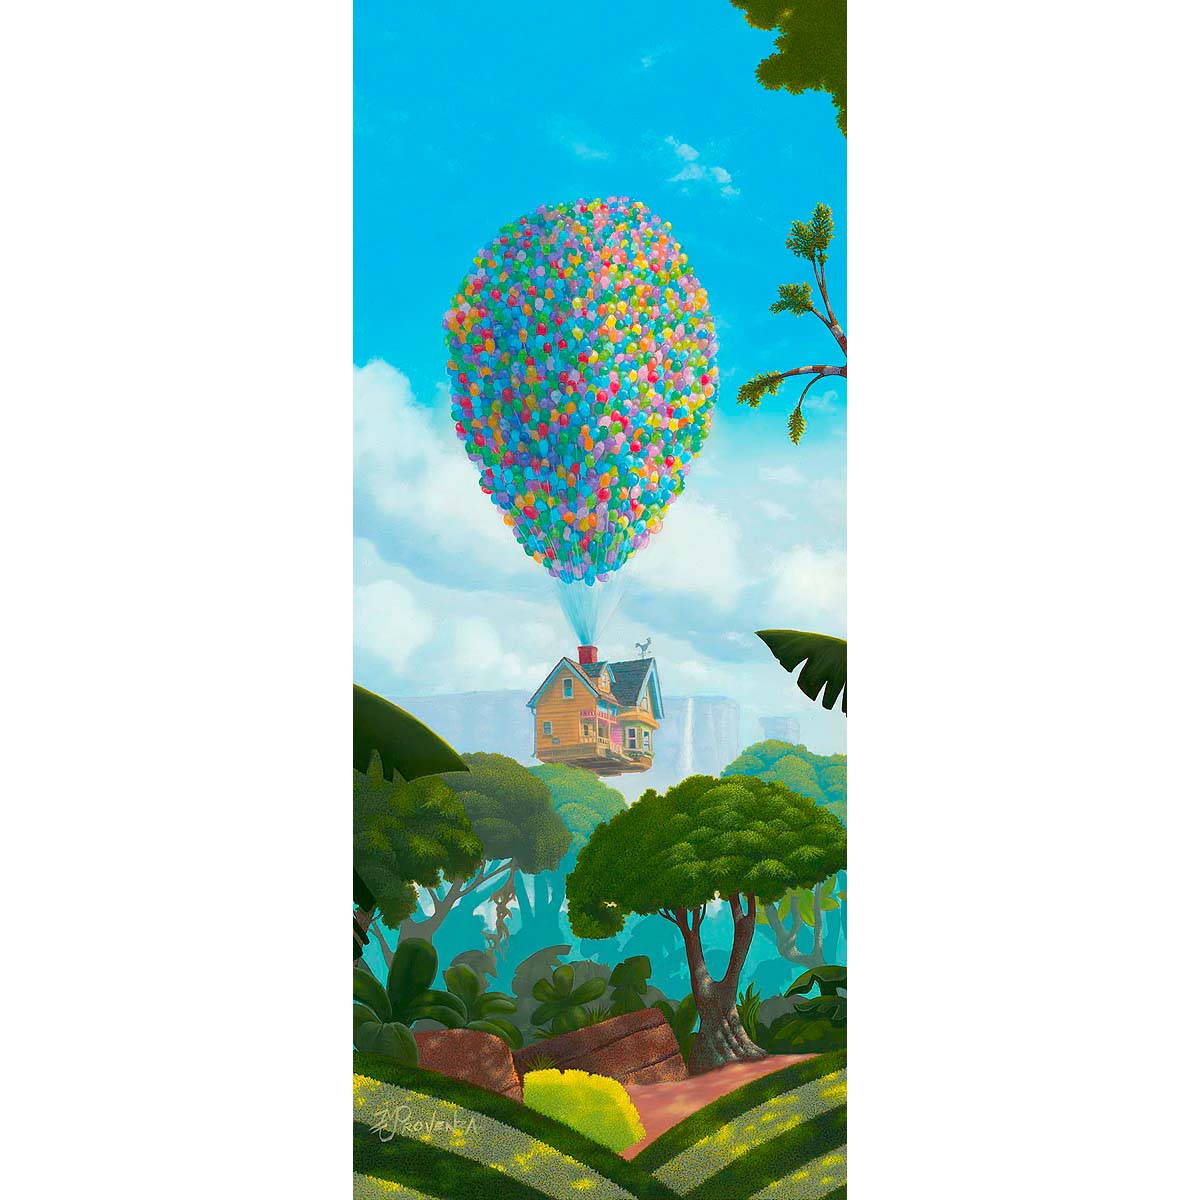 Michael Provenza Disney "Ellie's Dream" Limited Edition Canvas Giclee